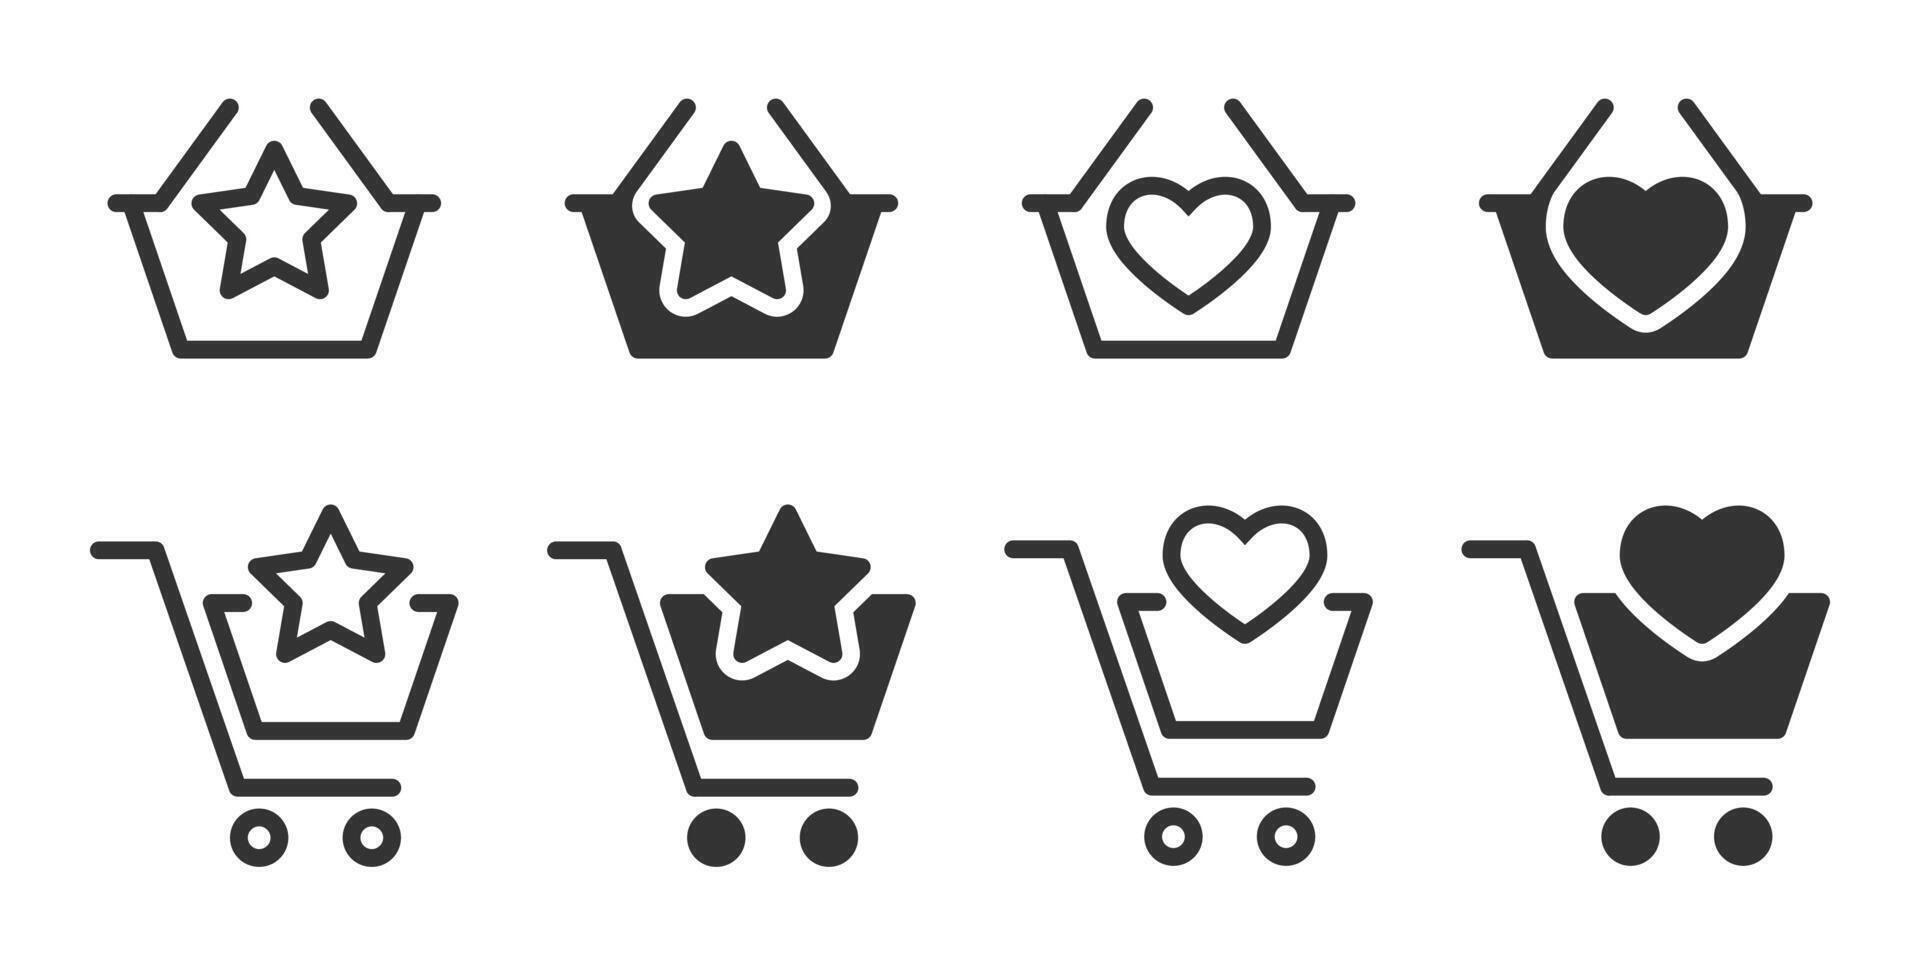 Favorites in basket icon. Shopping basket icon with heart symbol. Trolley with a star. Vector illustration.